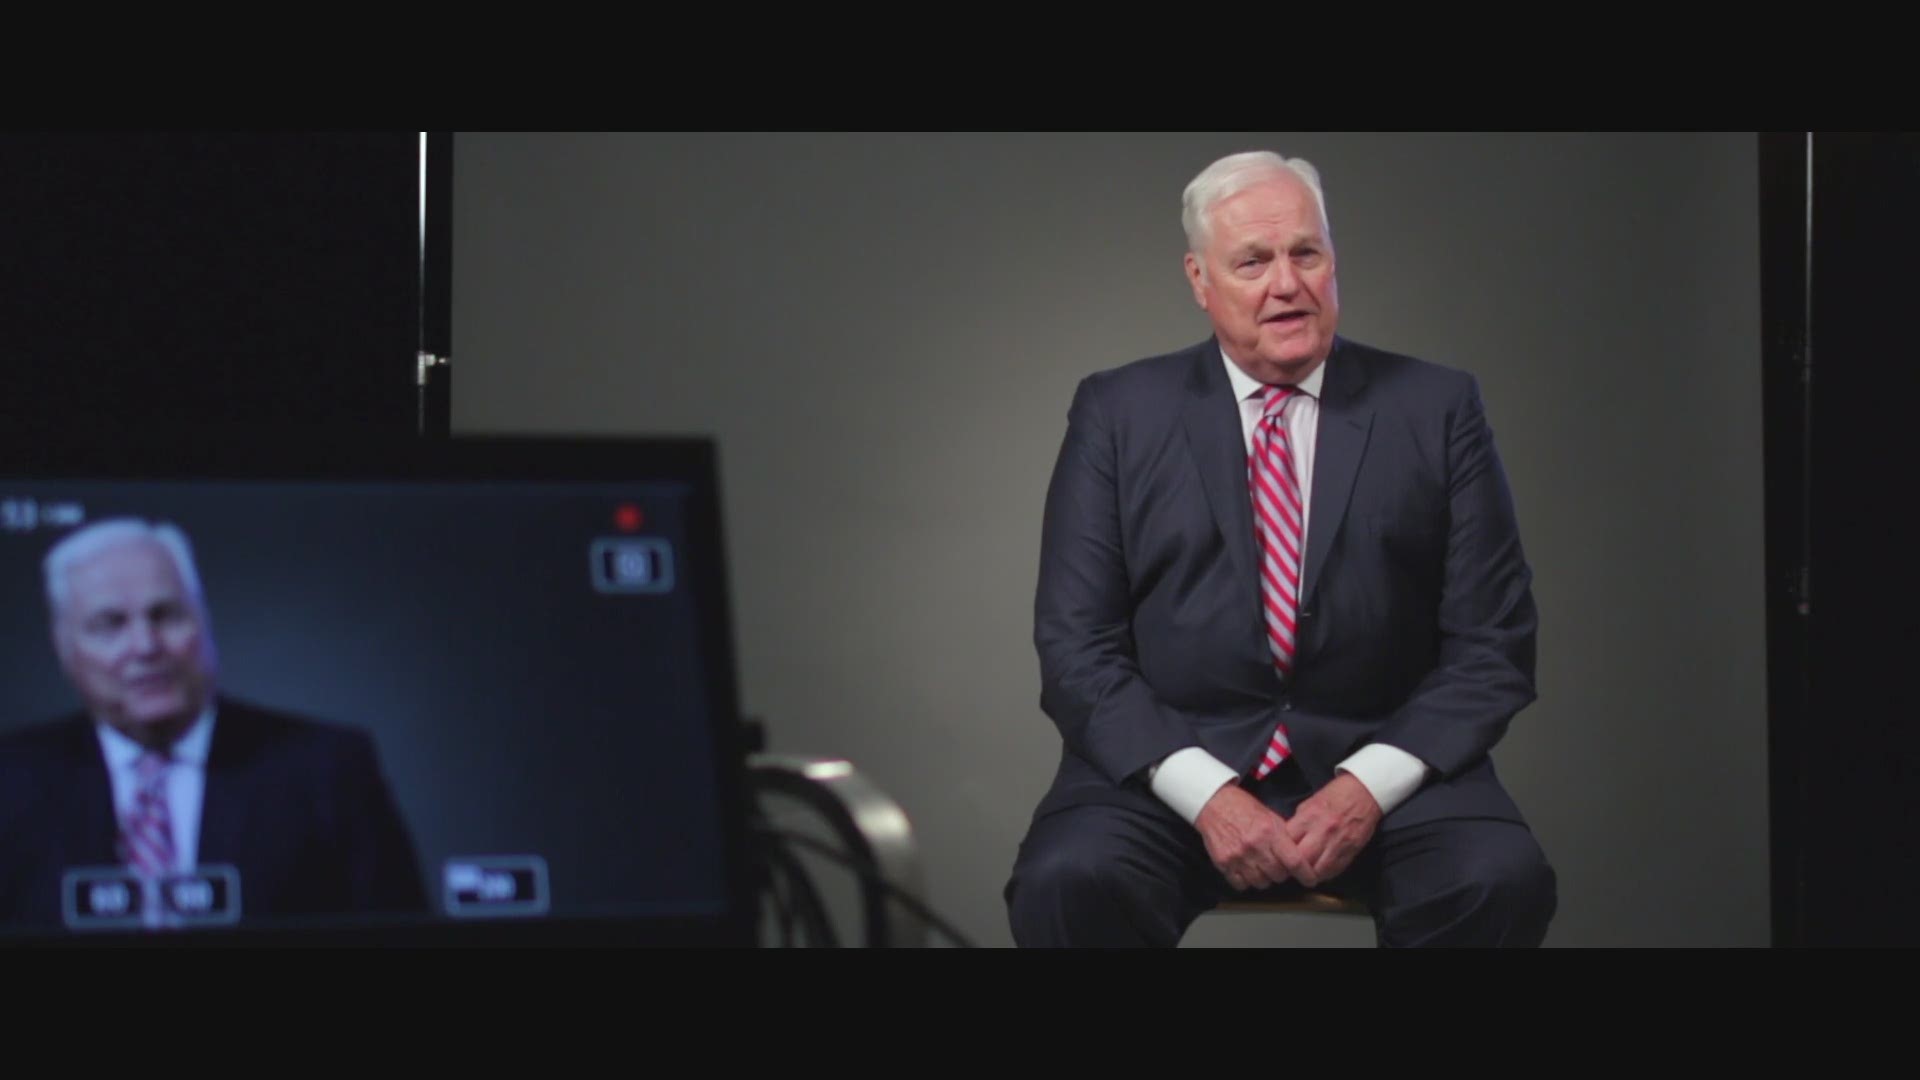 WFAA's Dale Hansen explains what kind of father and grandfather he's been. Watch more with Dale, Wednesday (5/24) at 10 and come back to WFAA.com/Original and the WFAA app for more.